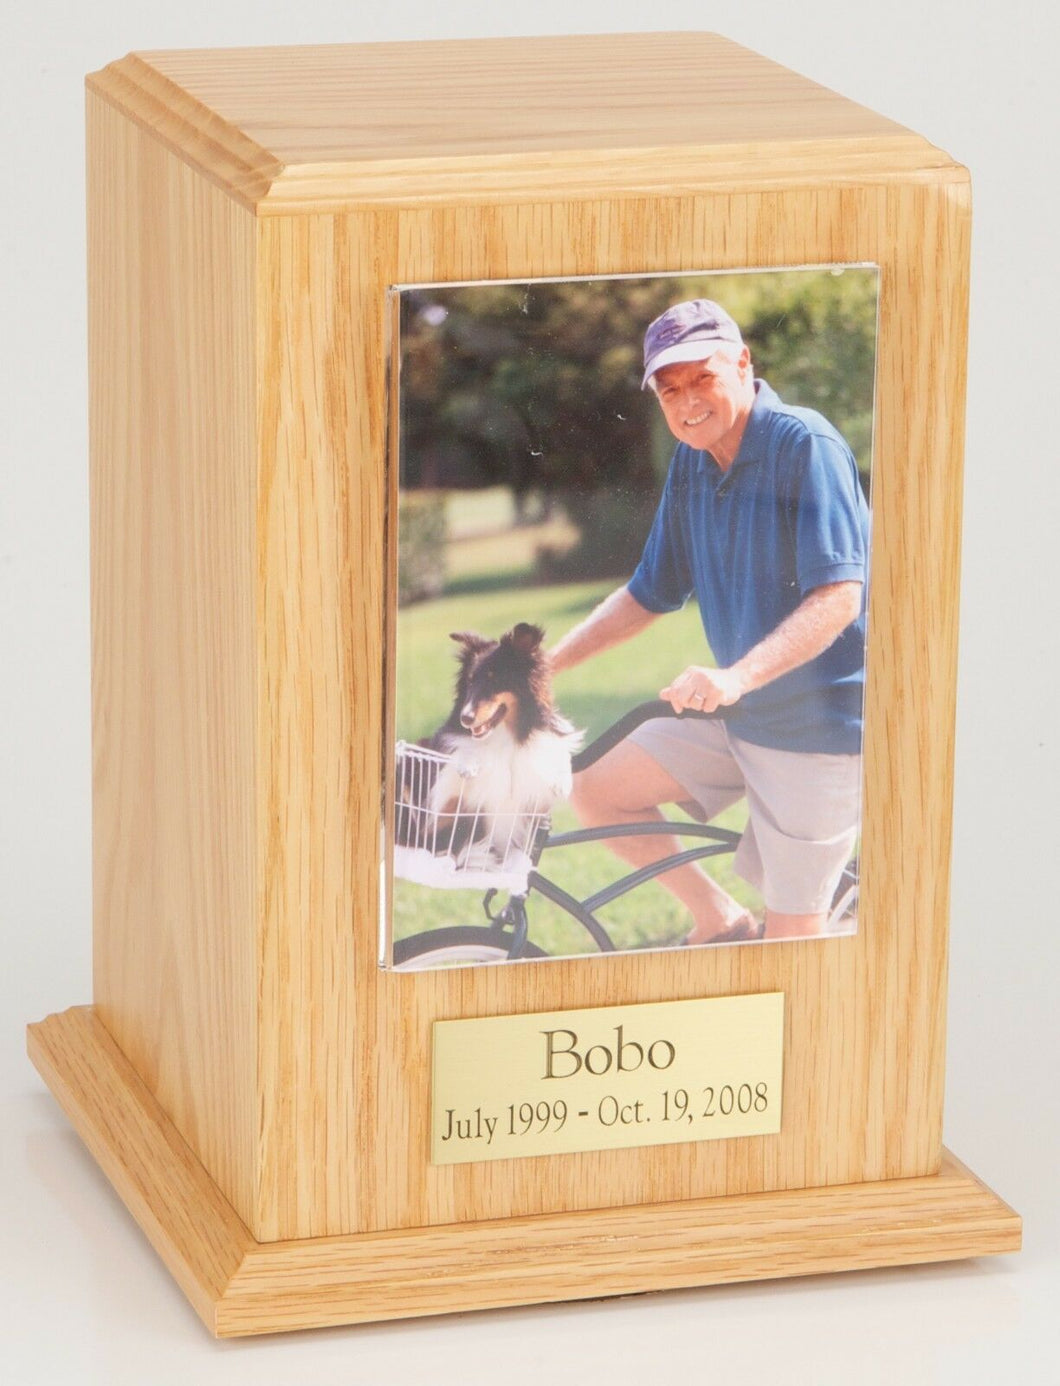 Large 110 Cubic Ins Oak Pet Tower Photo Urn for Ashes w/Engravable Nameplate